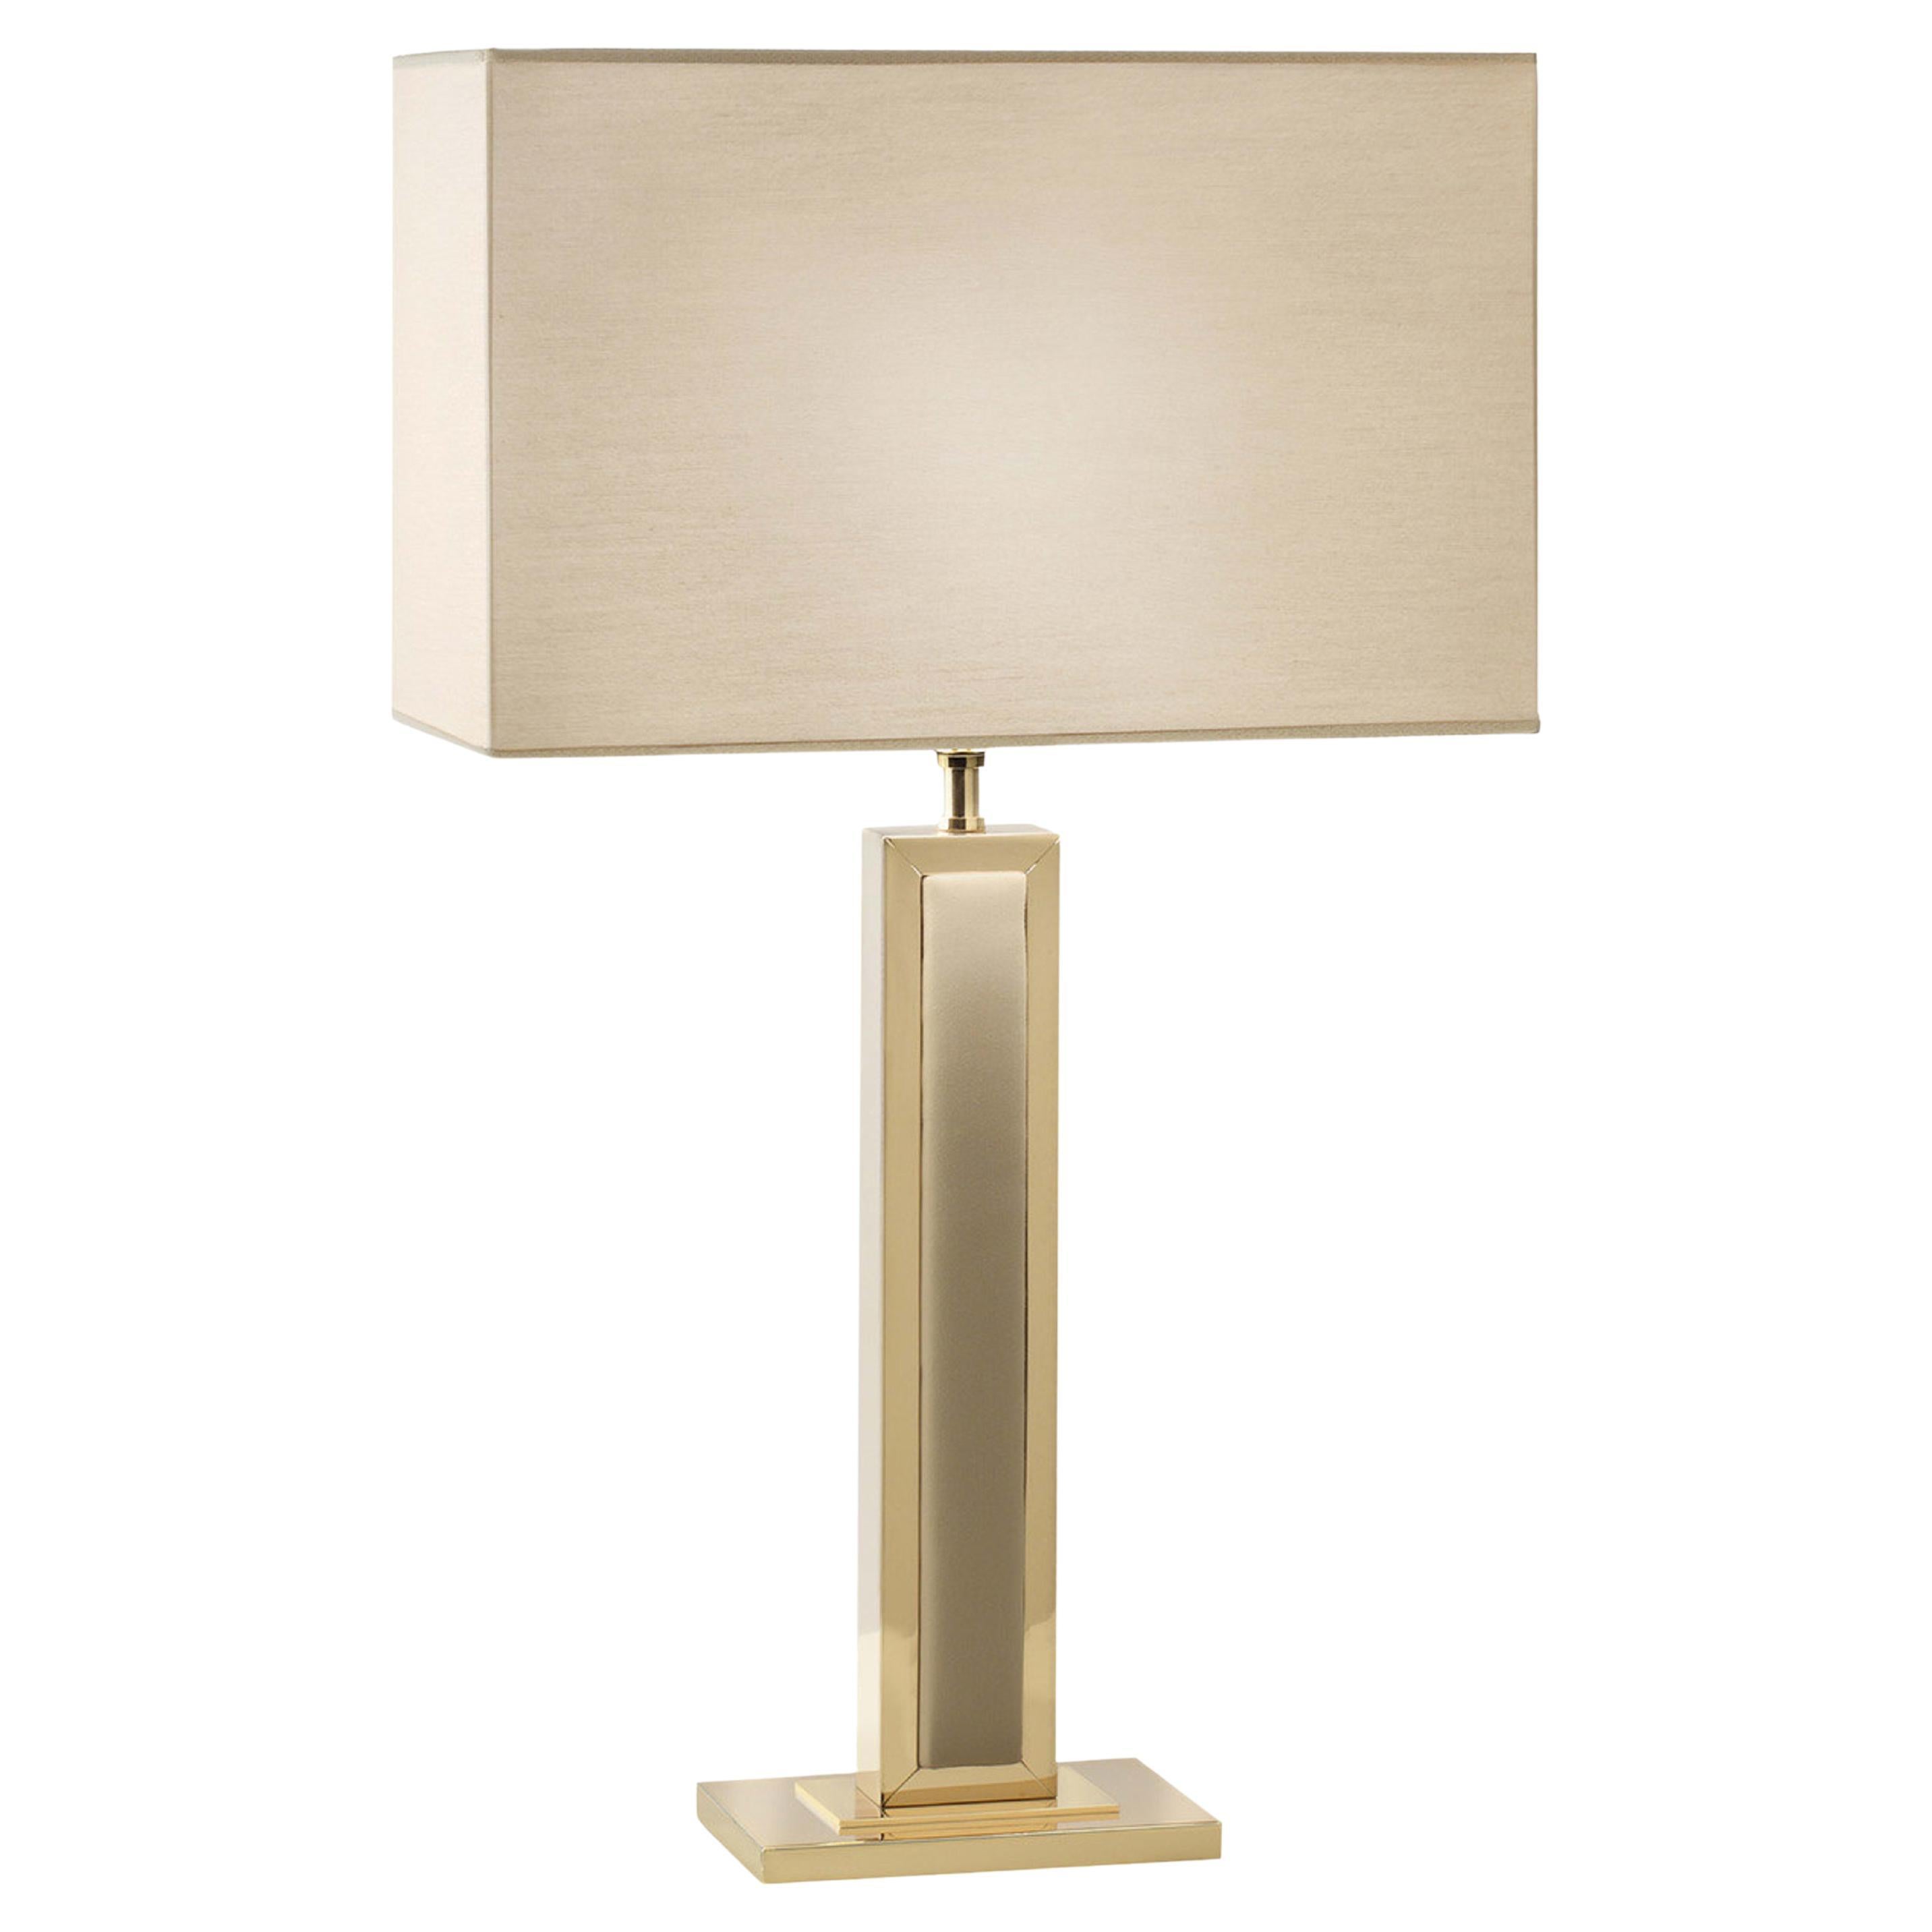 Cobalto Gold Table Lamp #2 For Sale